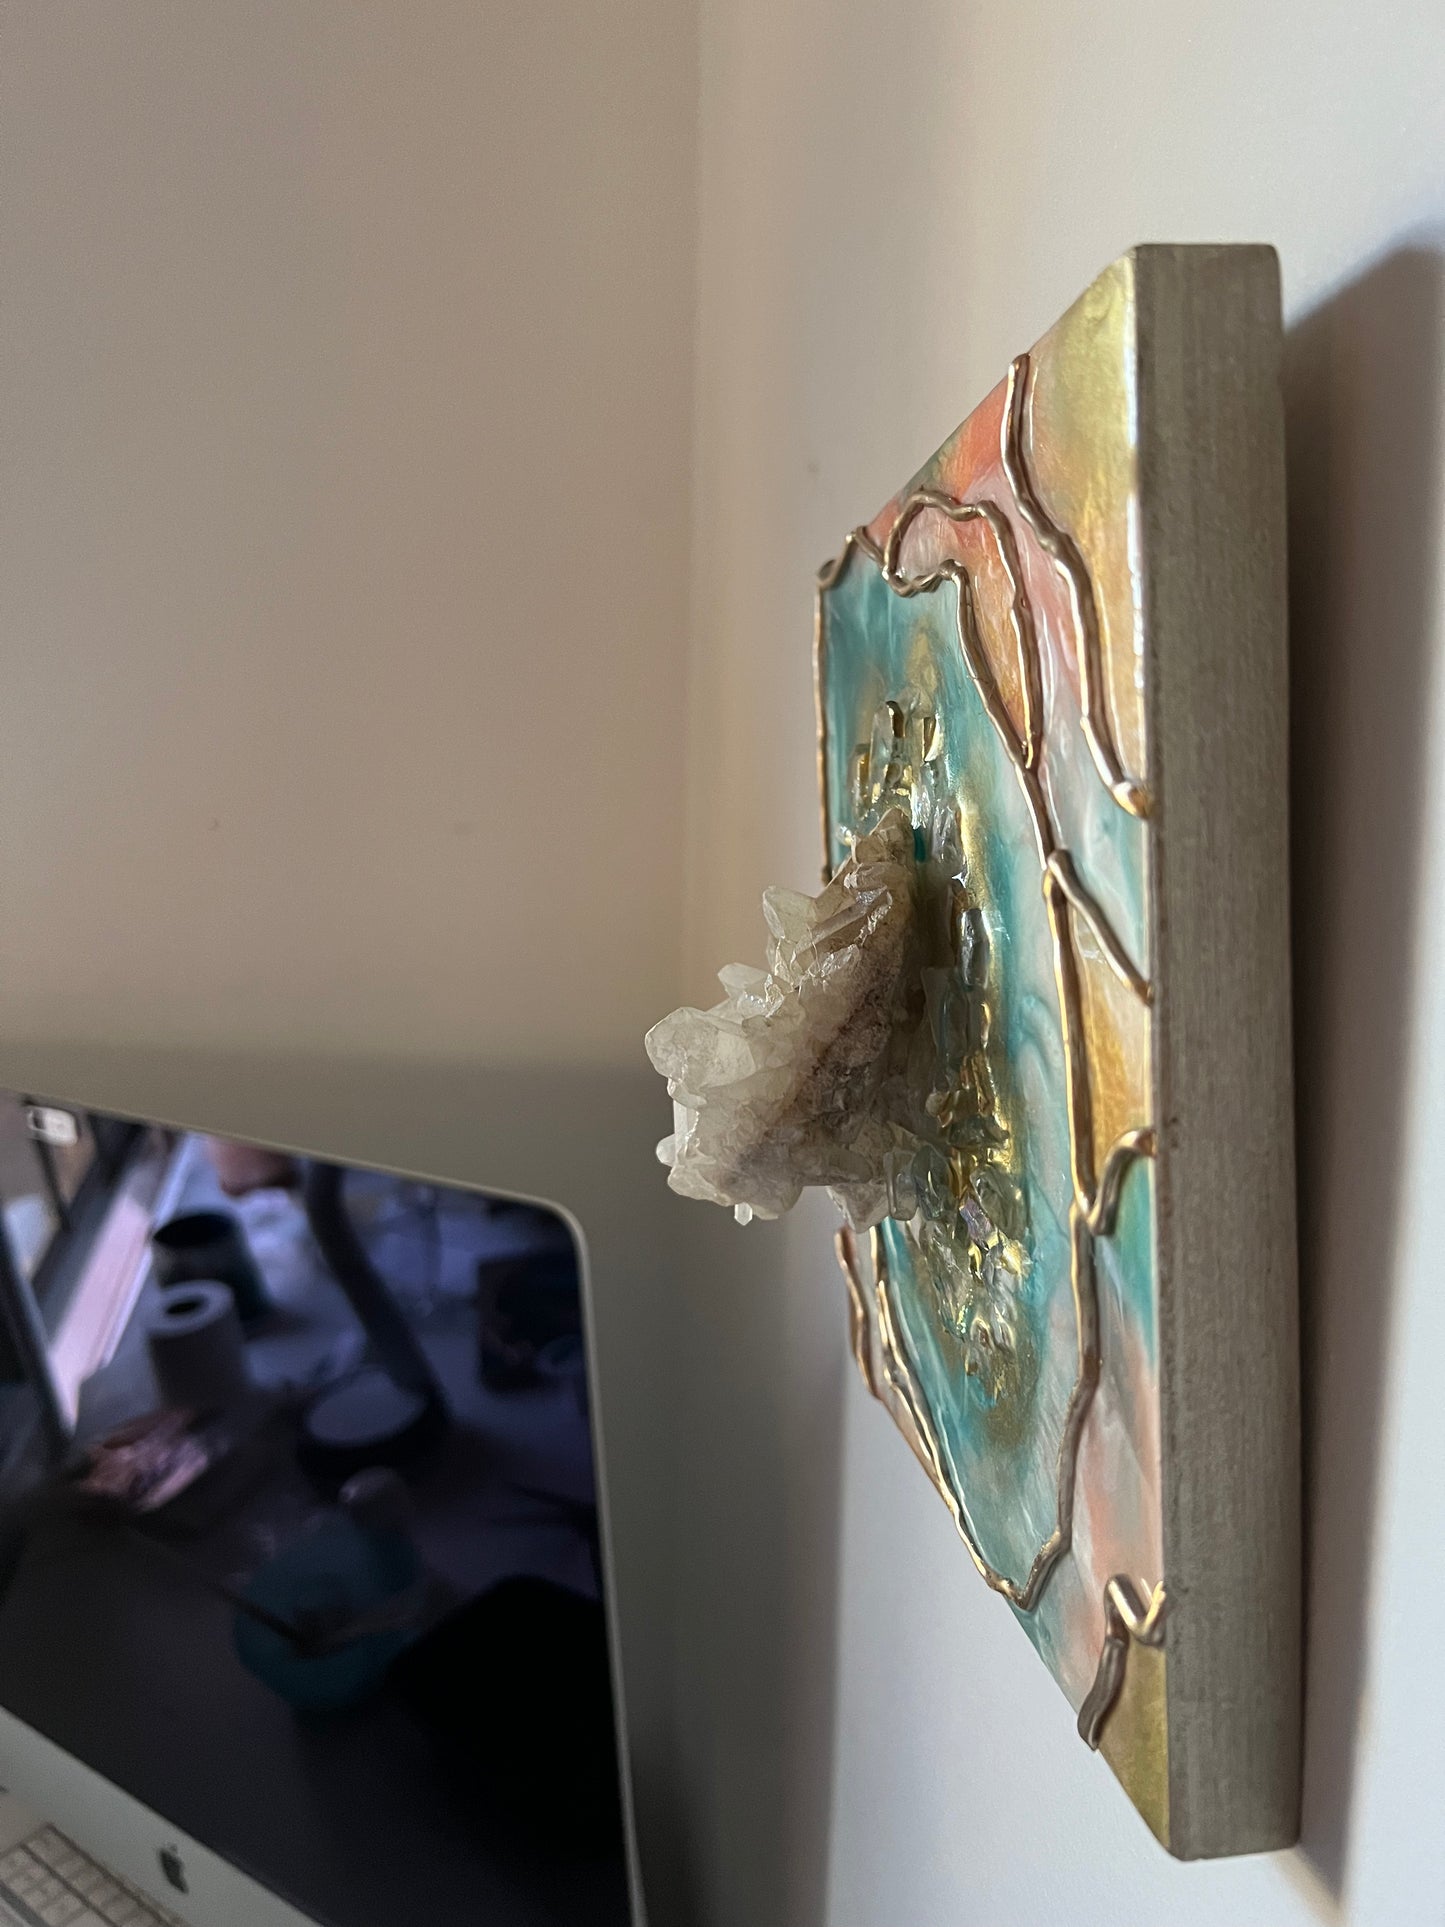 WHAT DO YOU TRULY WANT? / Clear Quartz Cluster / Geode Inspired Wall Art / One of a Kind / Resin Art